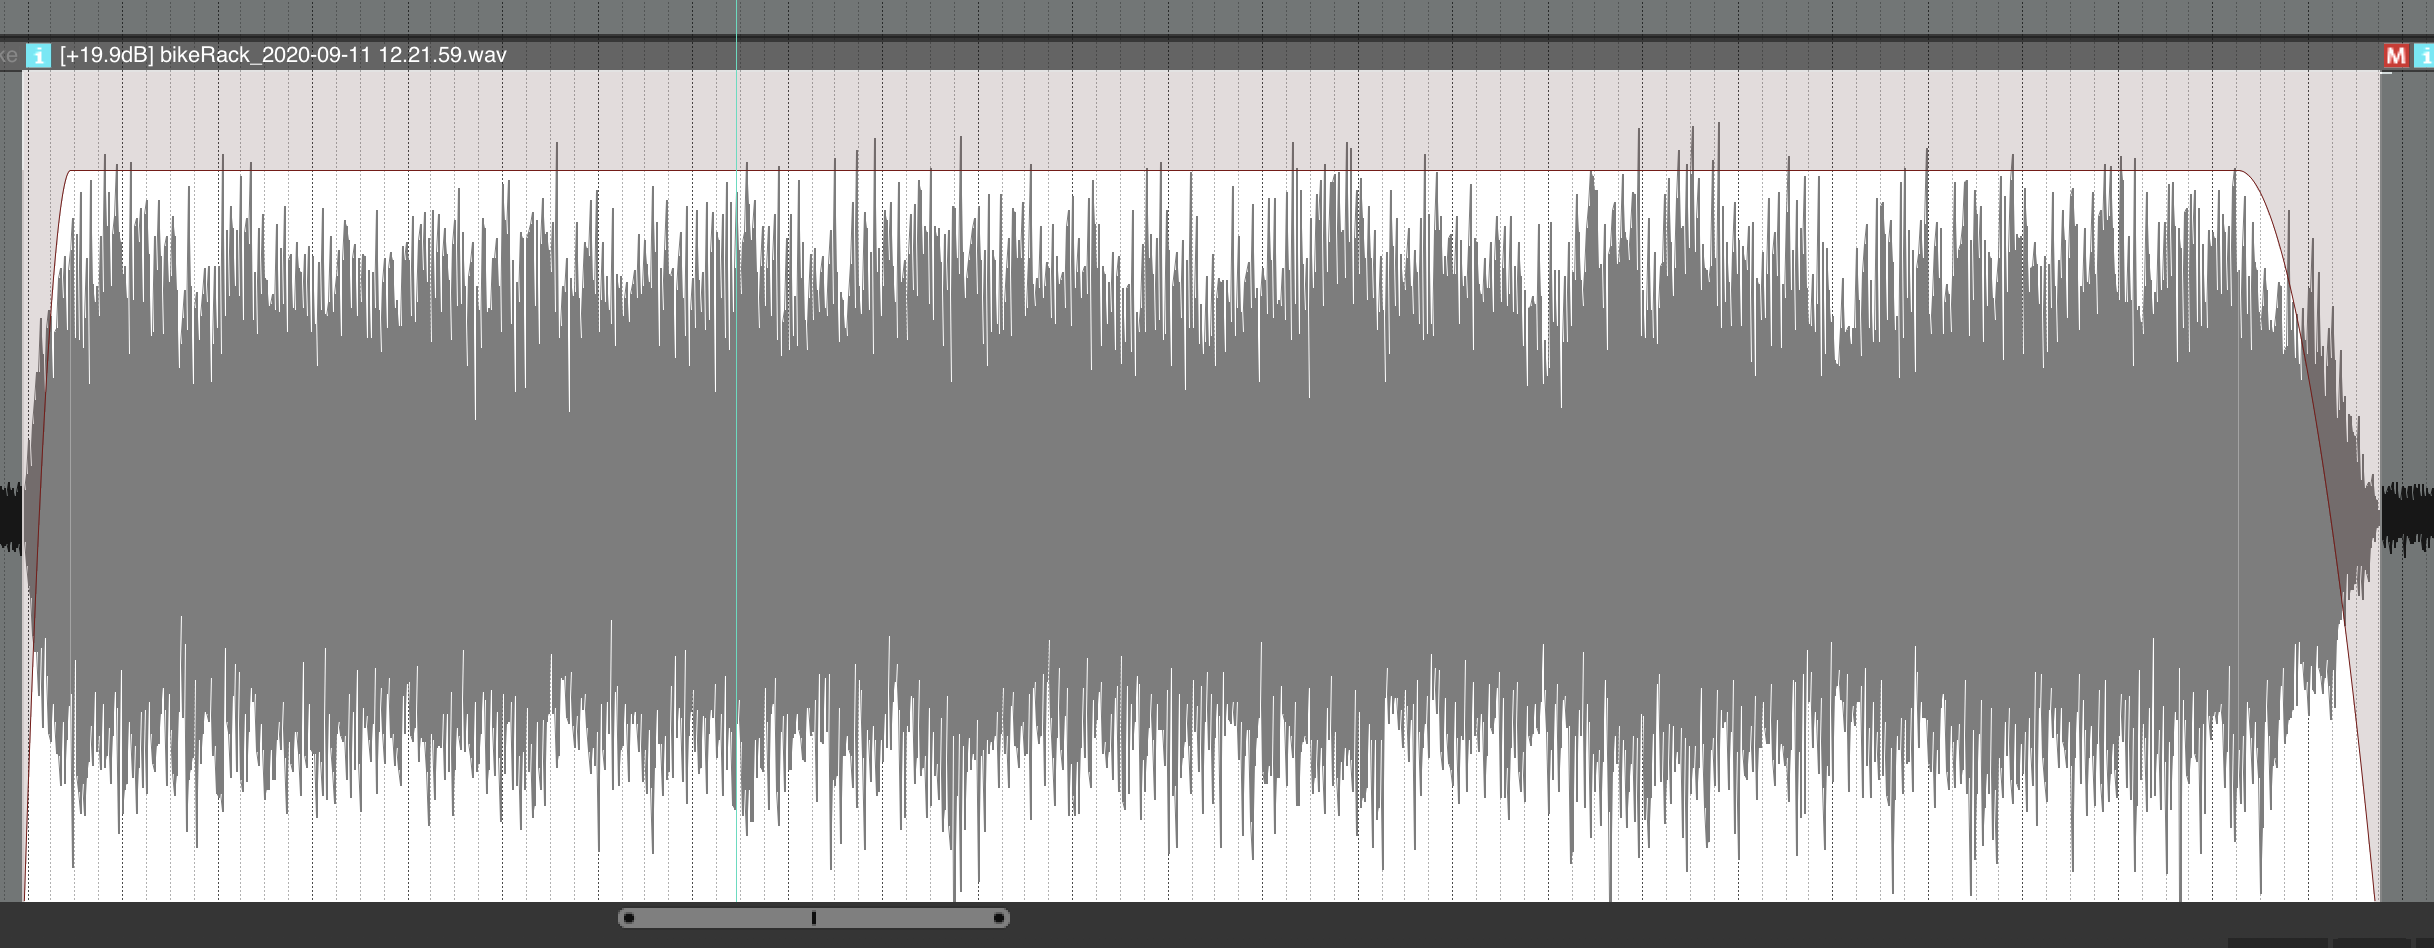 Example of resulting audio item, with normalization to -1dBFS and fade applied.